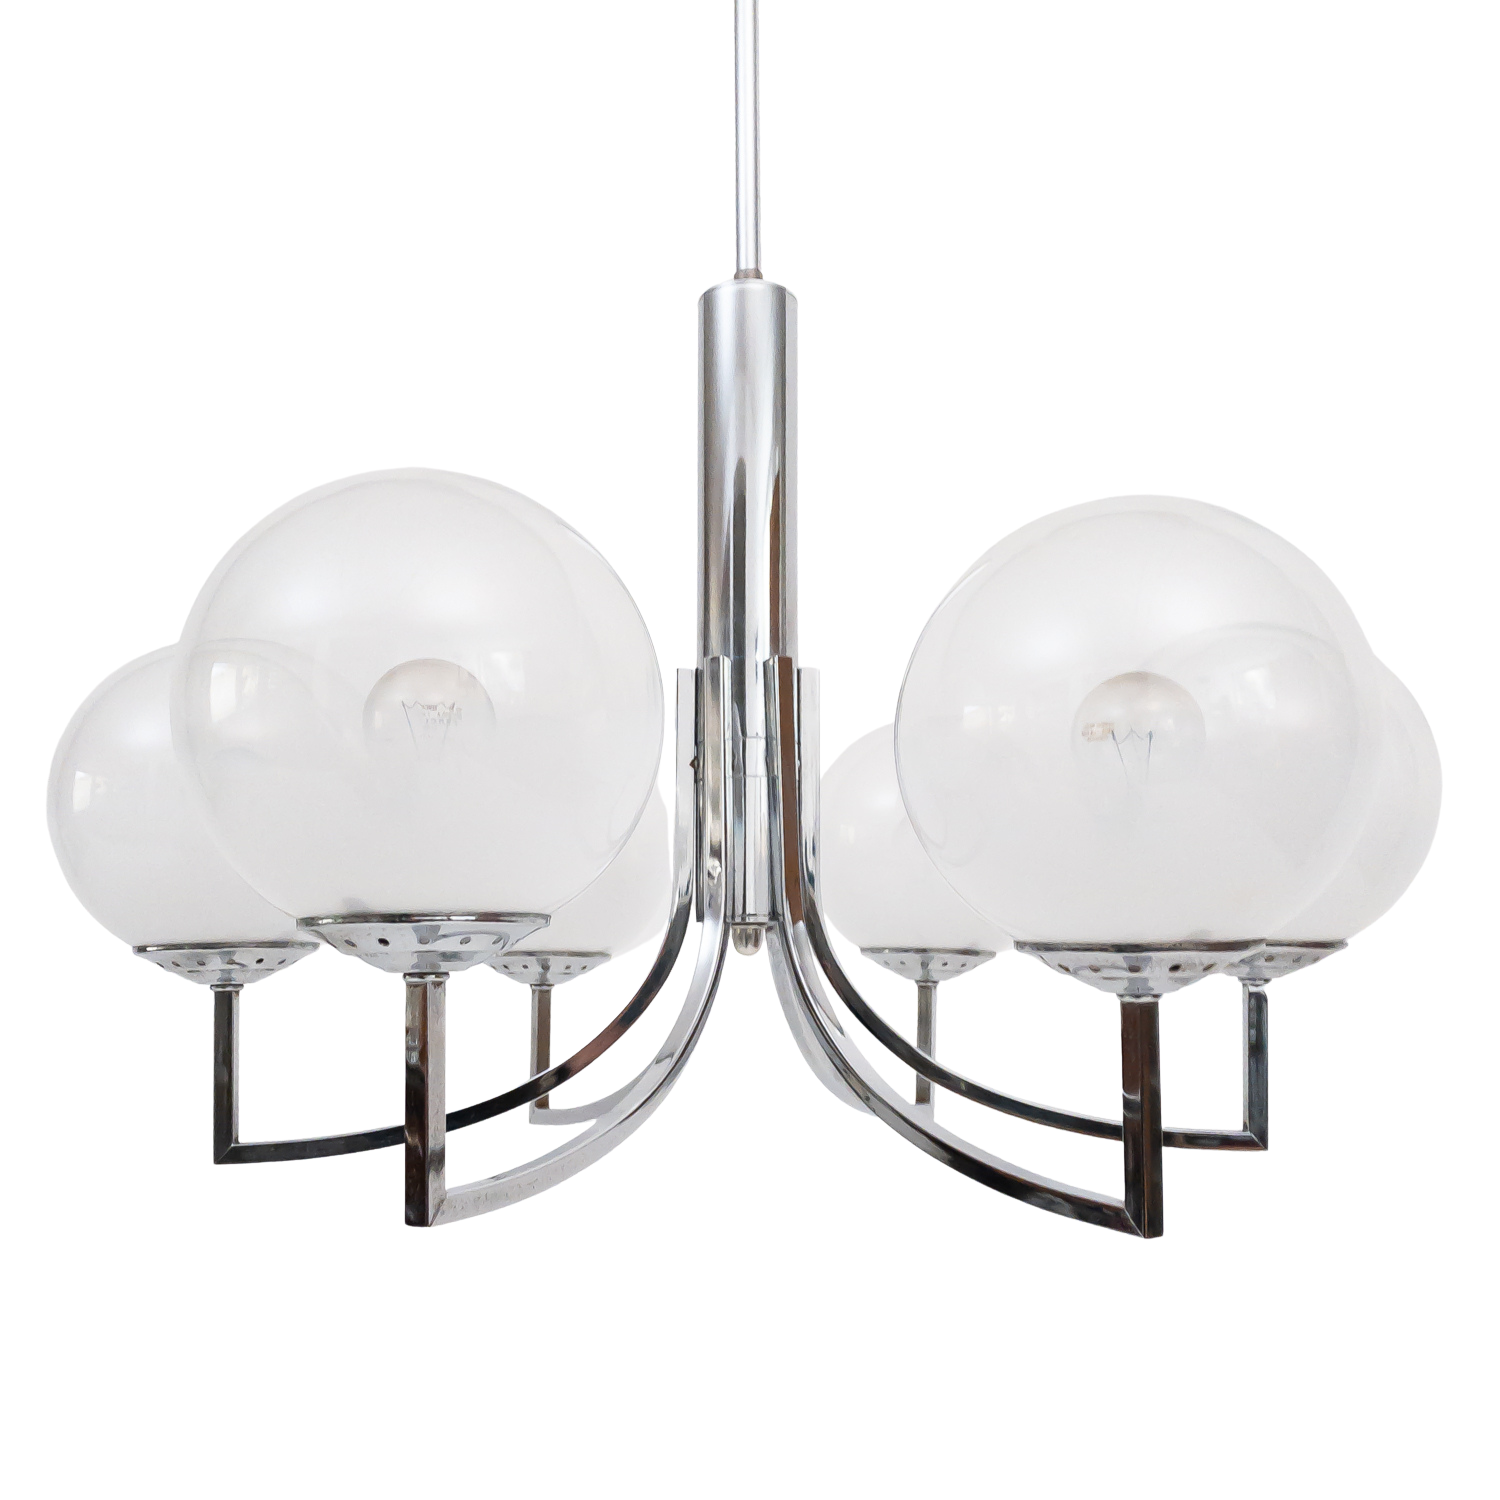 Suspension lamp with 6 light points in chromed steel, 1960s